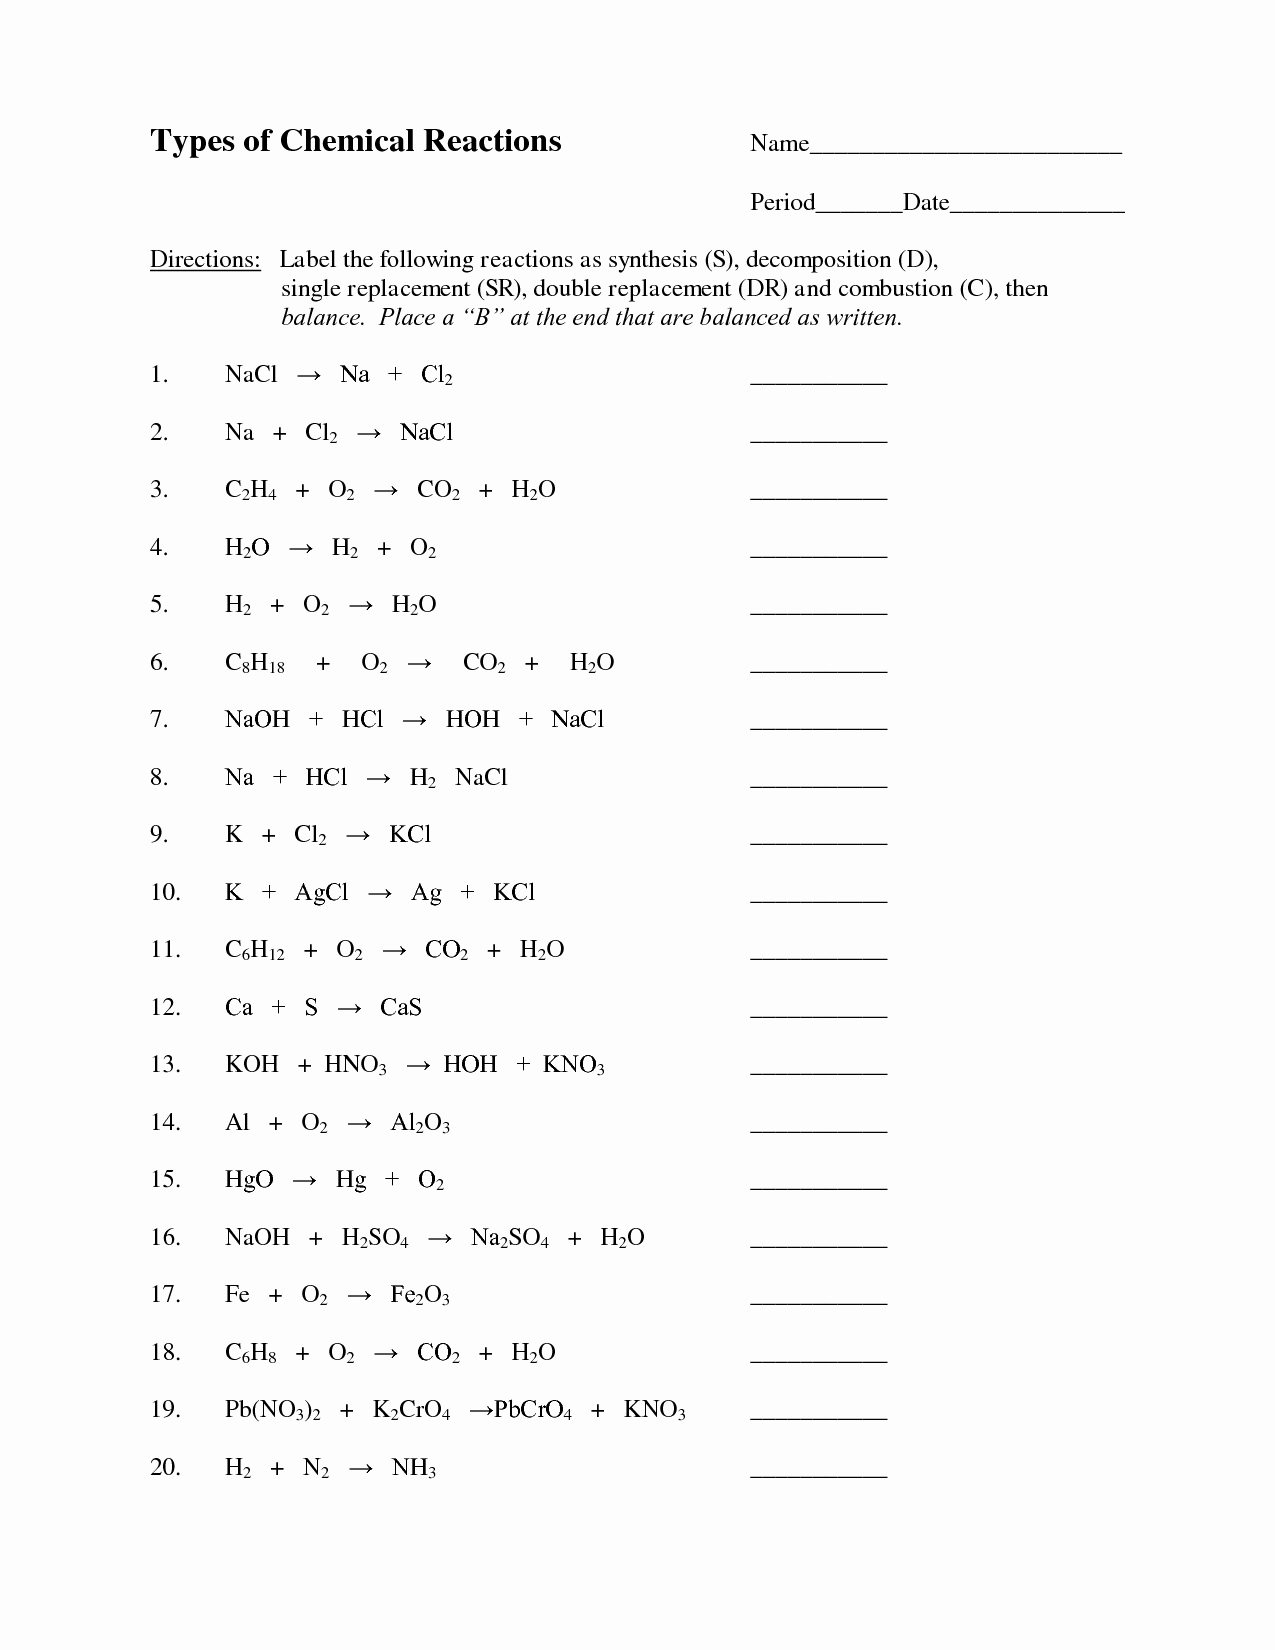 Enzyme Reactions Worksheet Answer Key Lovely 15 Best Of Types Reactions Worksheet Answer Key